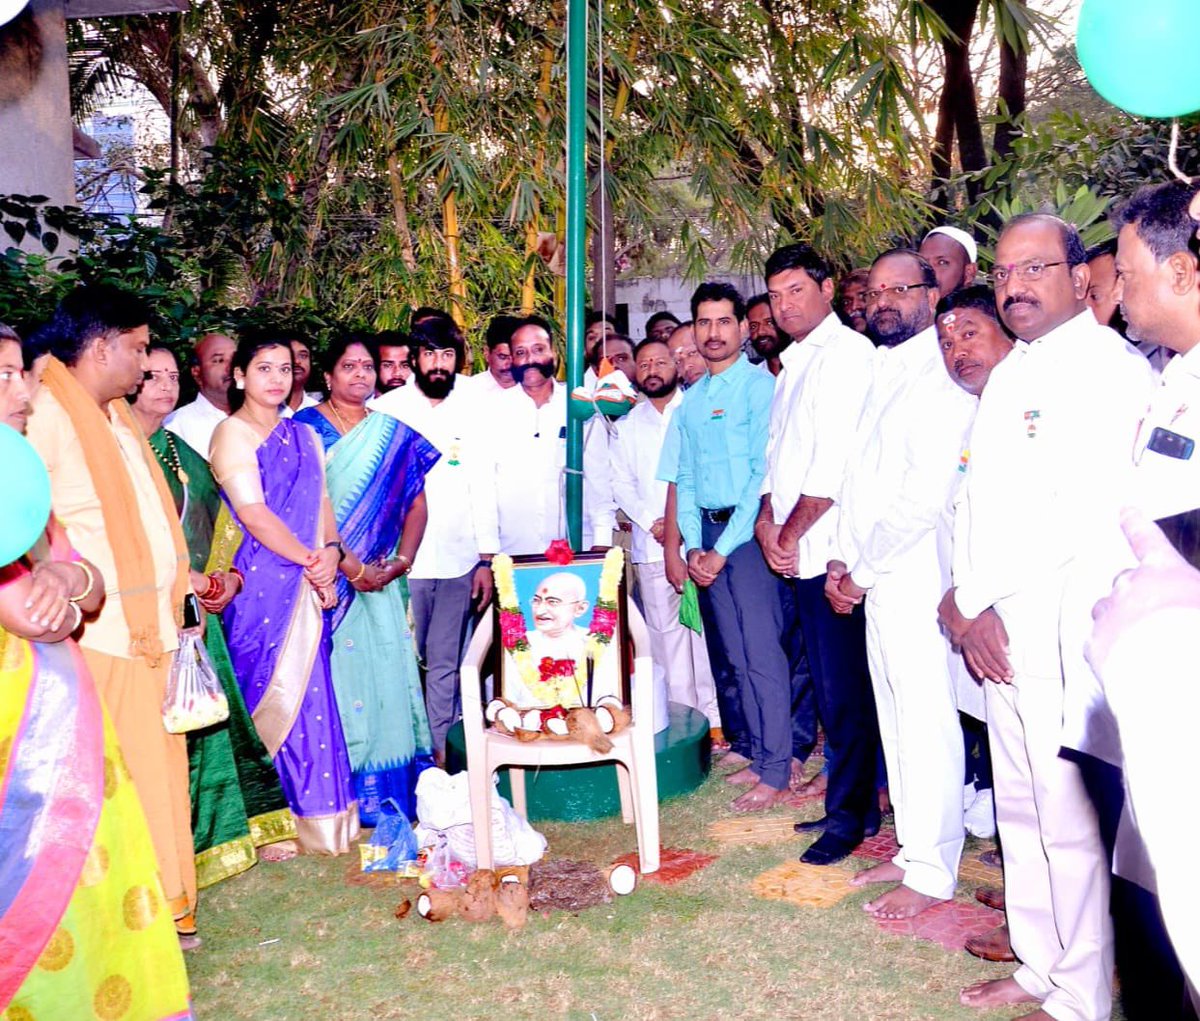 Attended Republic Day celebrations at Municipal Office along with Hon’ble MLA @MarriRajasekar Garu, Dy.Comm Srinivas Reddy Garu & BRS Party Cadre and later unfurled the National Flag in various colonies.

#75thRepublicDay
#VandeMataram 

@KTRBRS